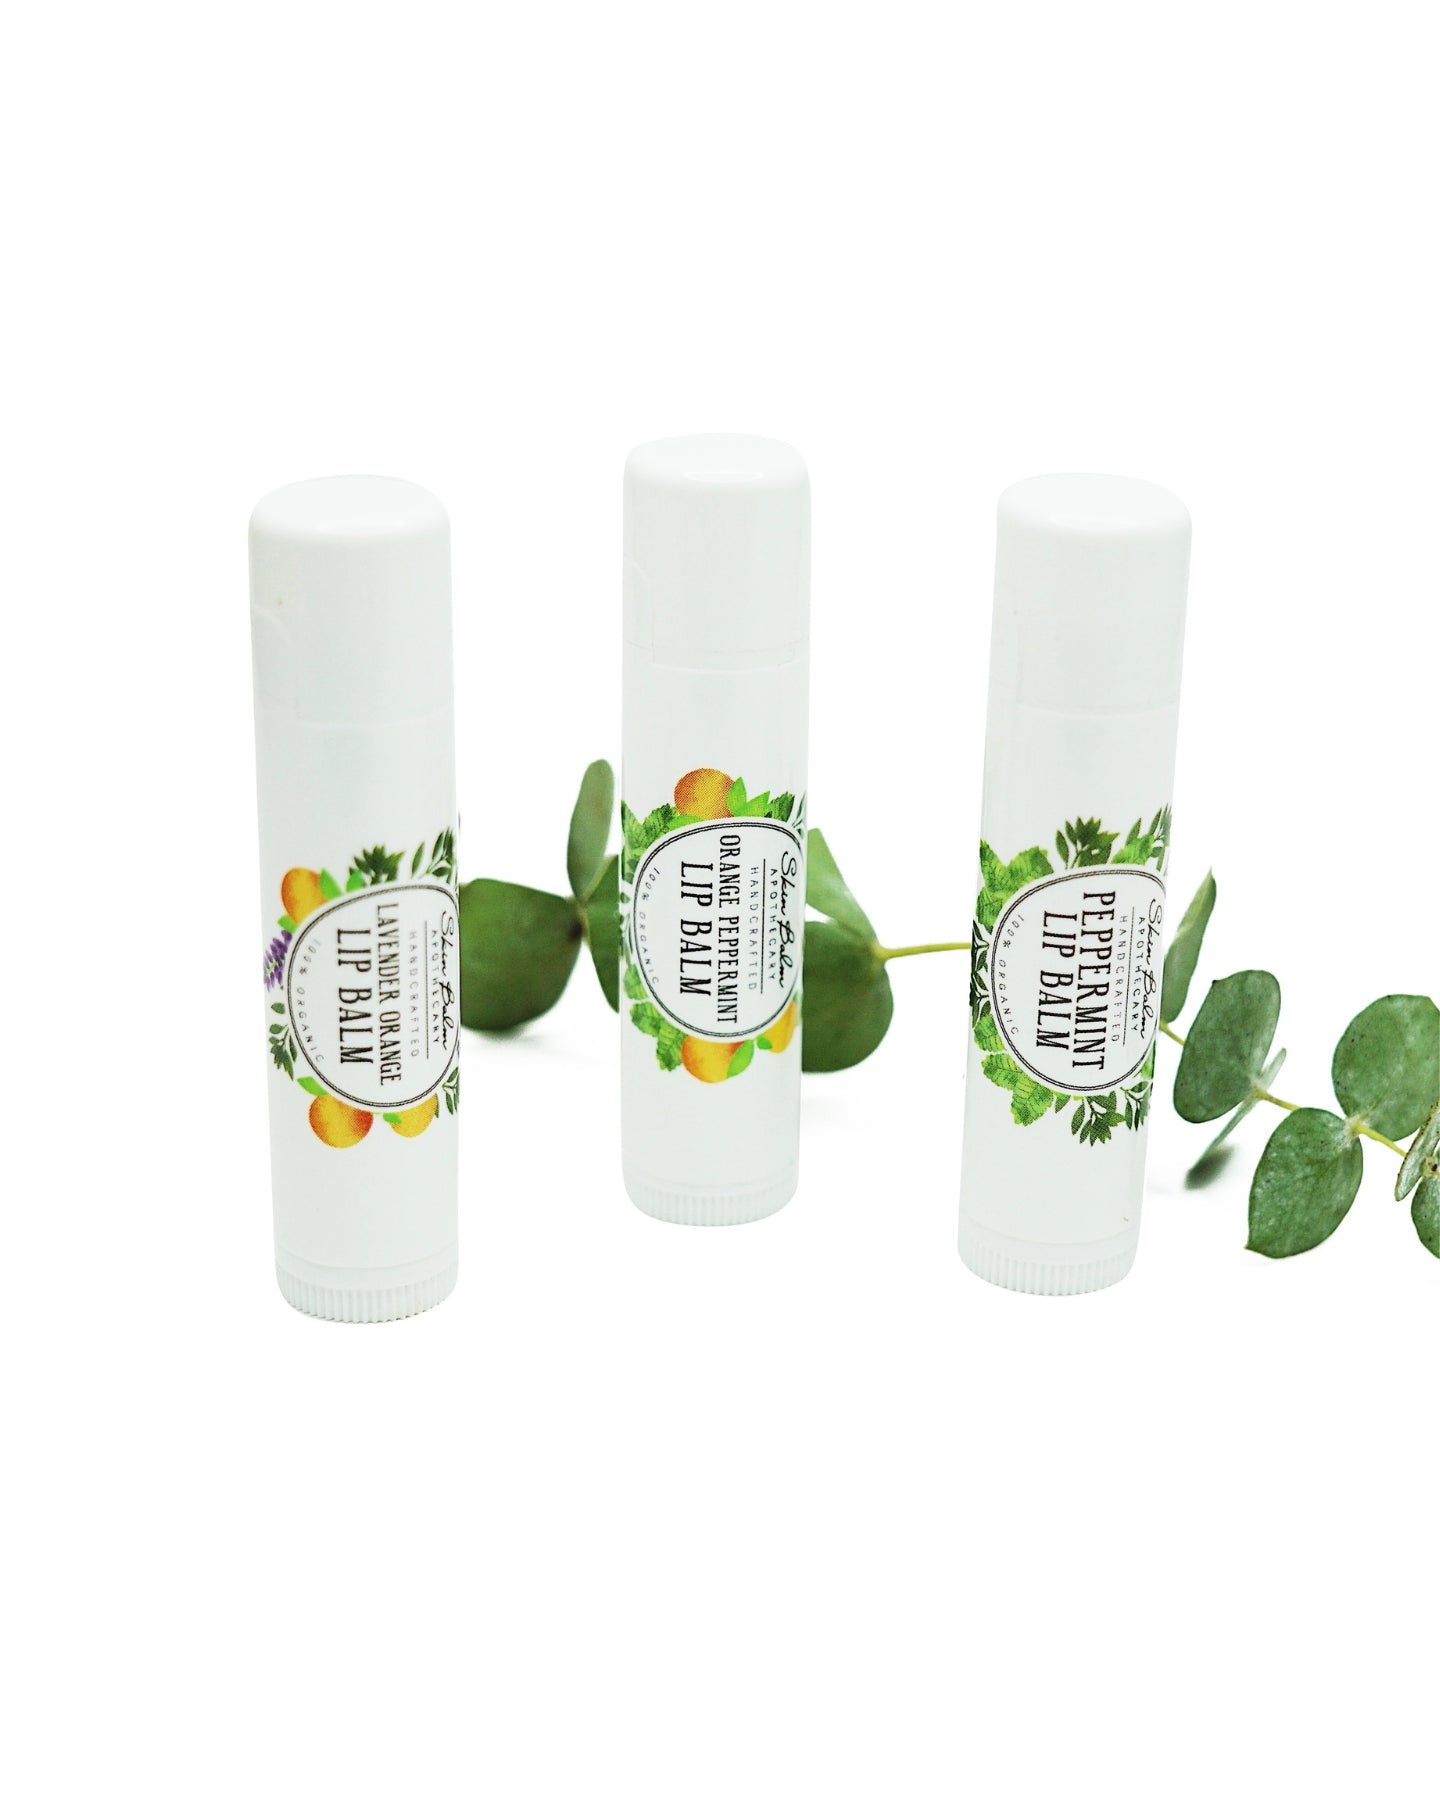 Lip Balm Trio with green foliage against a white background.